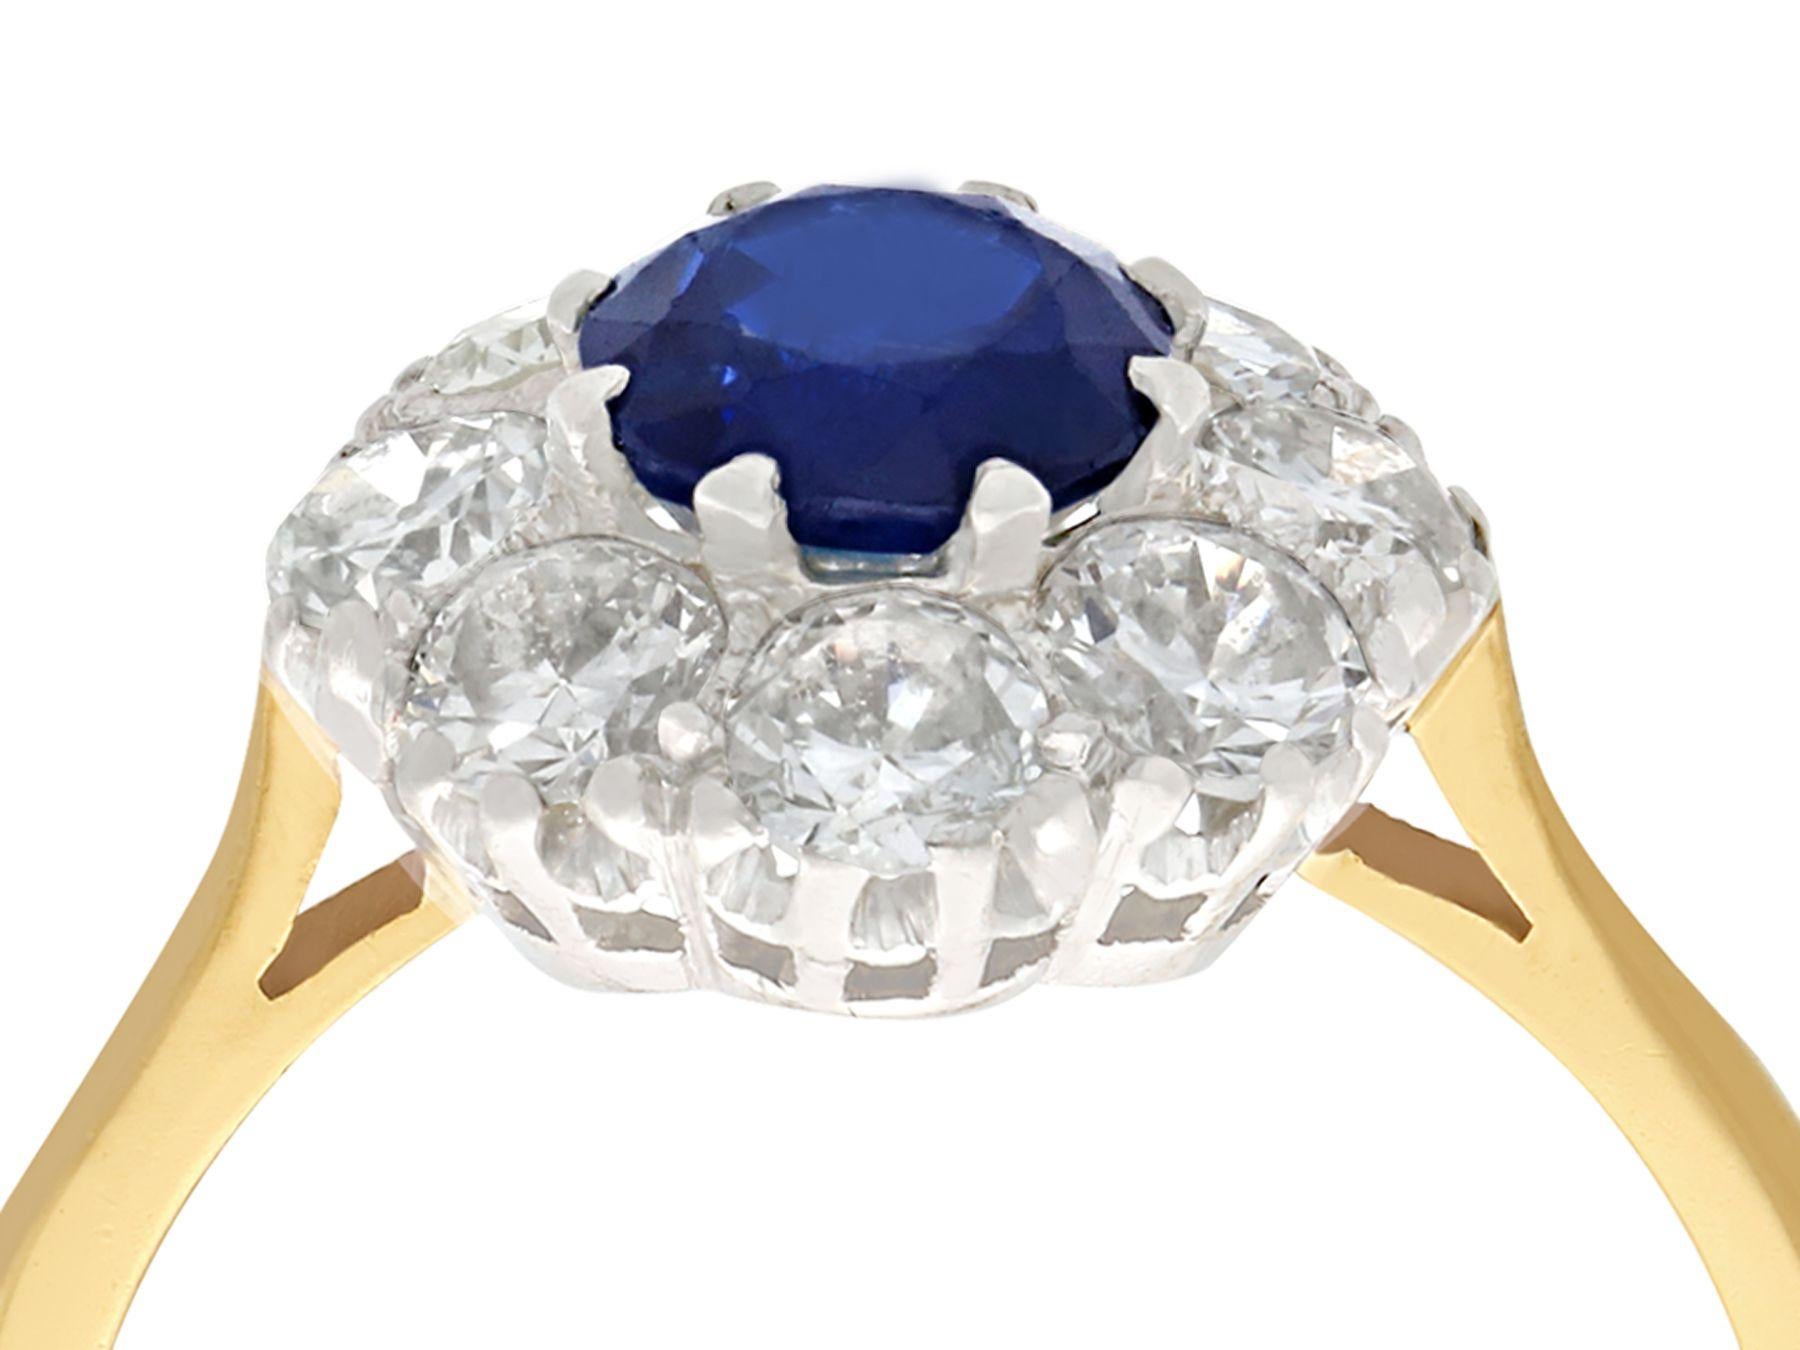 A fine and impressive 1.05 carat blue sapphire and 1.45 carat diamond, 18 karat yellow gold and platinum set dress ring; part of our diverse vintage jewelry collections

This fine and impressive vintage sapphire and diamond ring has been crafted in